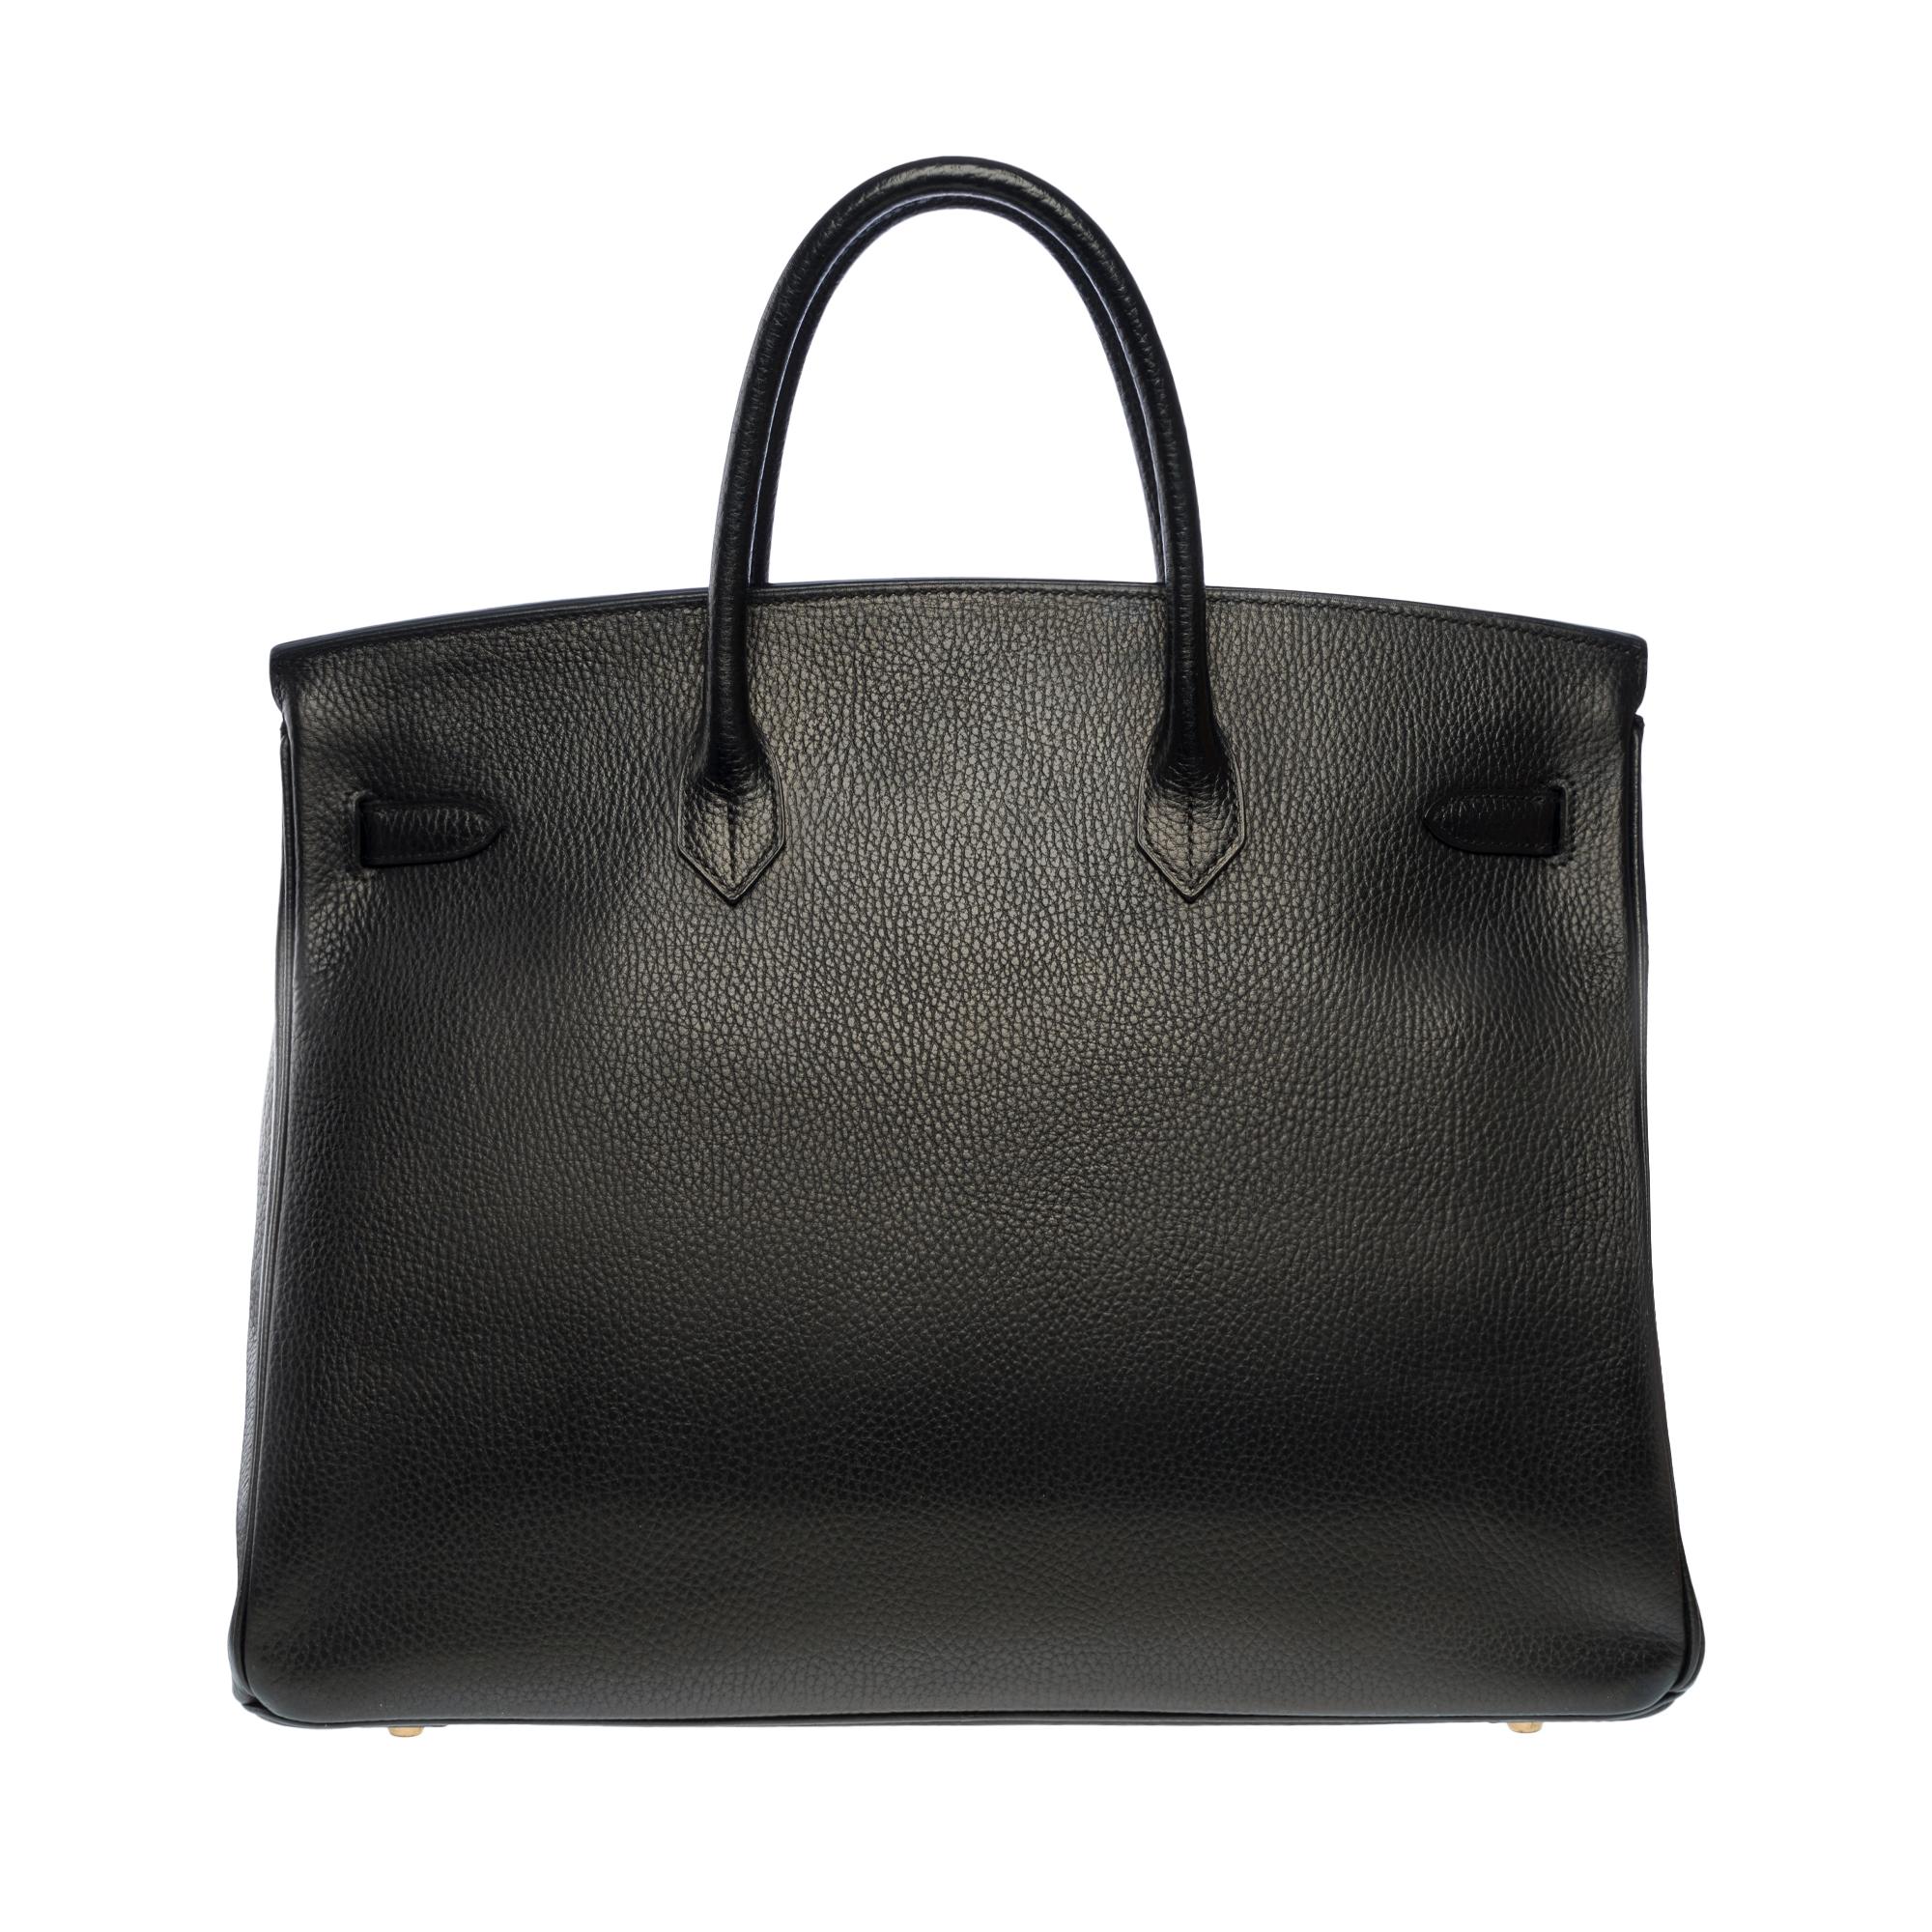 Beautiful​ ​Hermes​ ​Birkin​ ​40​ ​cm​ ​handbag​ ​in​ ​black Vache​ ​Ardennes​ ​leather,​ ​gold-plated​ ​metal​ ​hardware,​ ​double​ ​black​ ​leather​ ​handle​ ​for​ ​a​ ​hand​ ​carry

Flap​ ​closure
Black​ ​leather​ ​inner​ ​lining,​ ​one​ ​zipped​